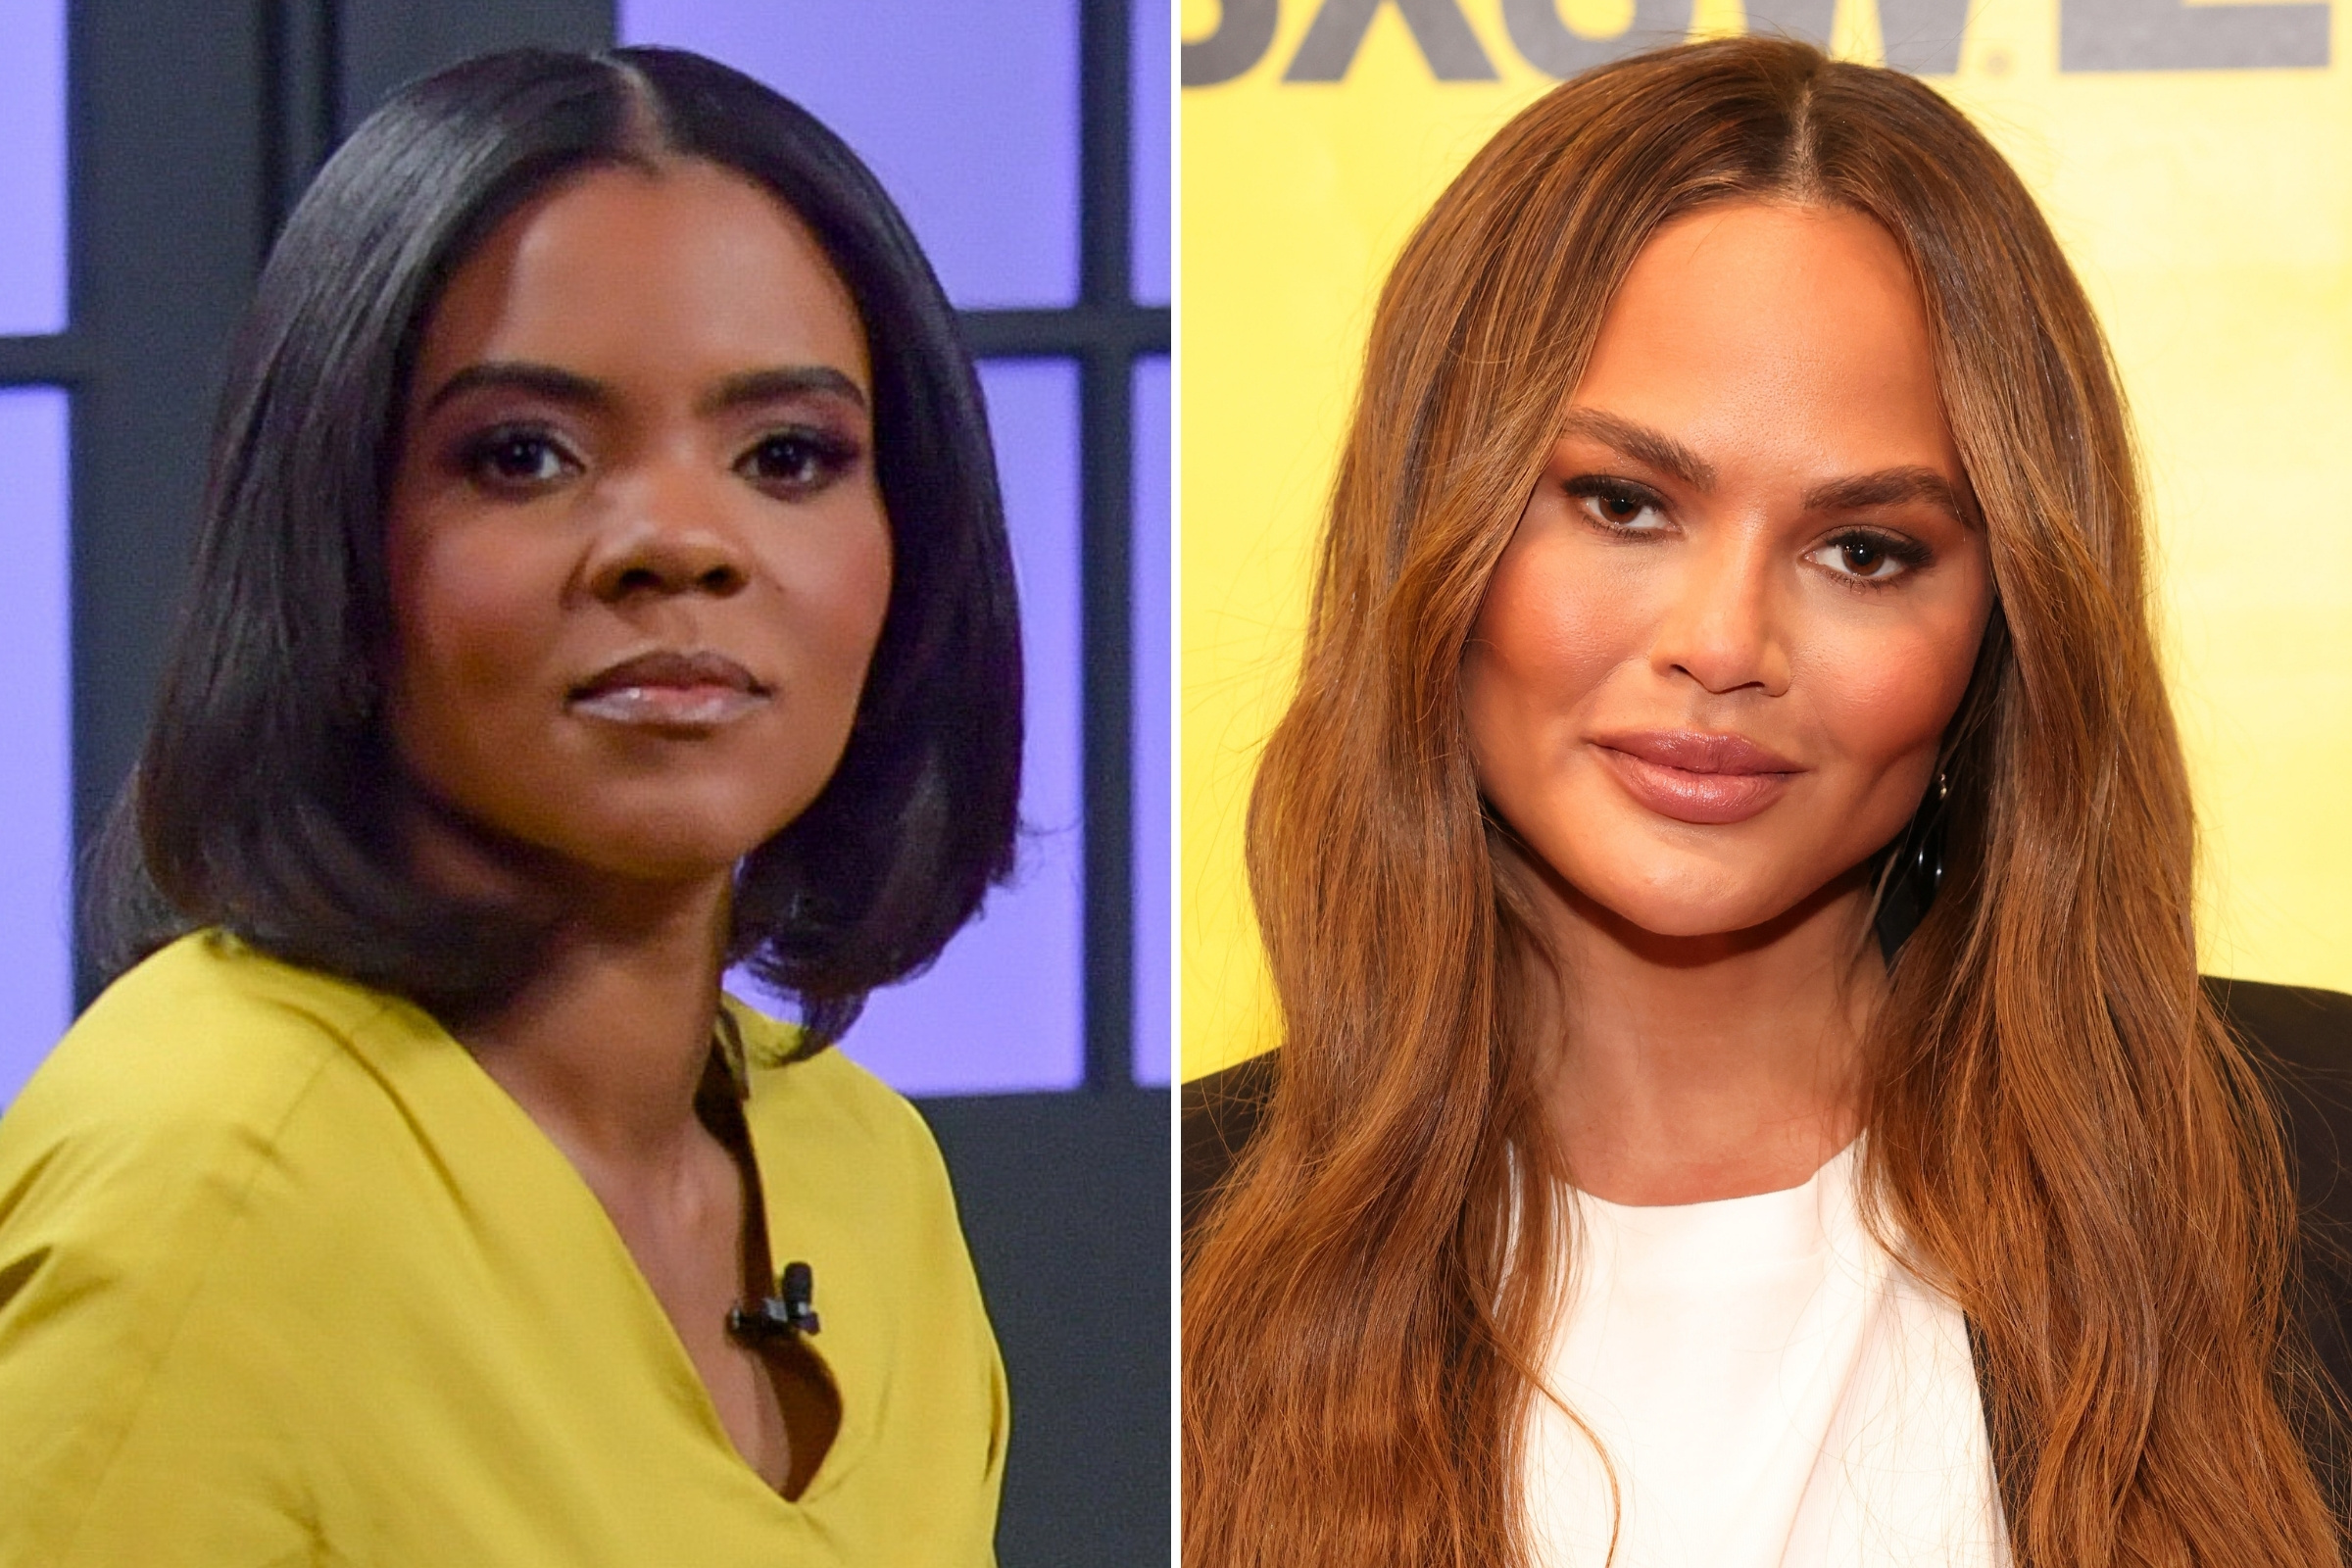 Candace Owens Calls Chrissy Teigen 'Mentally Disturbed' Over Abortion Story